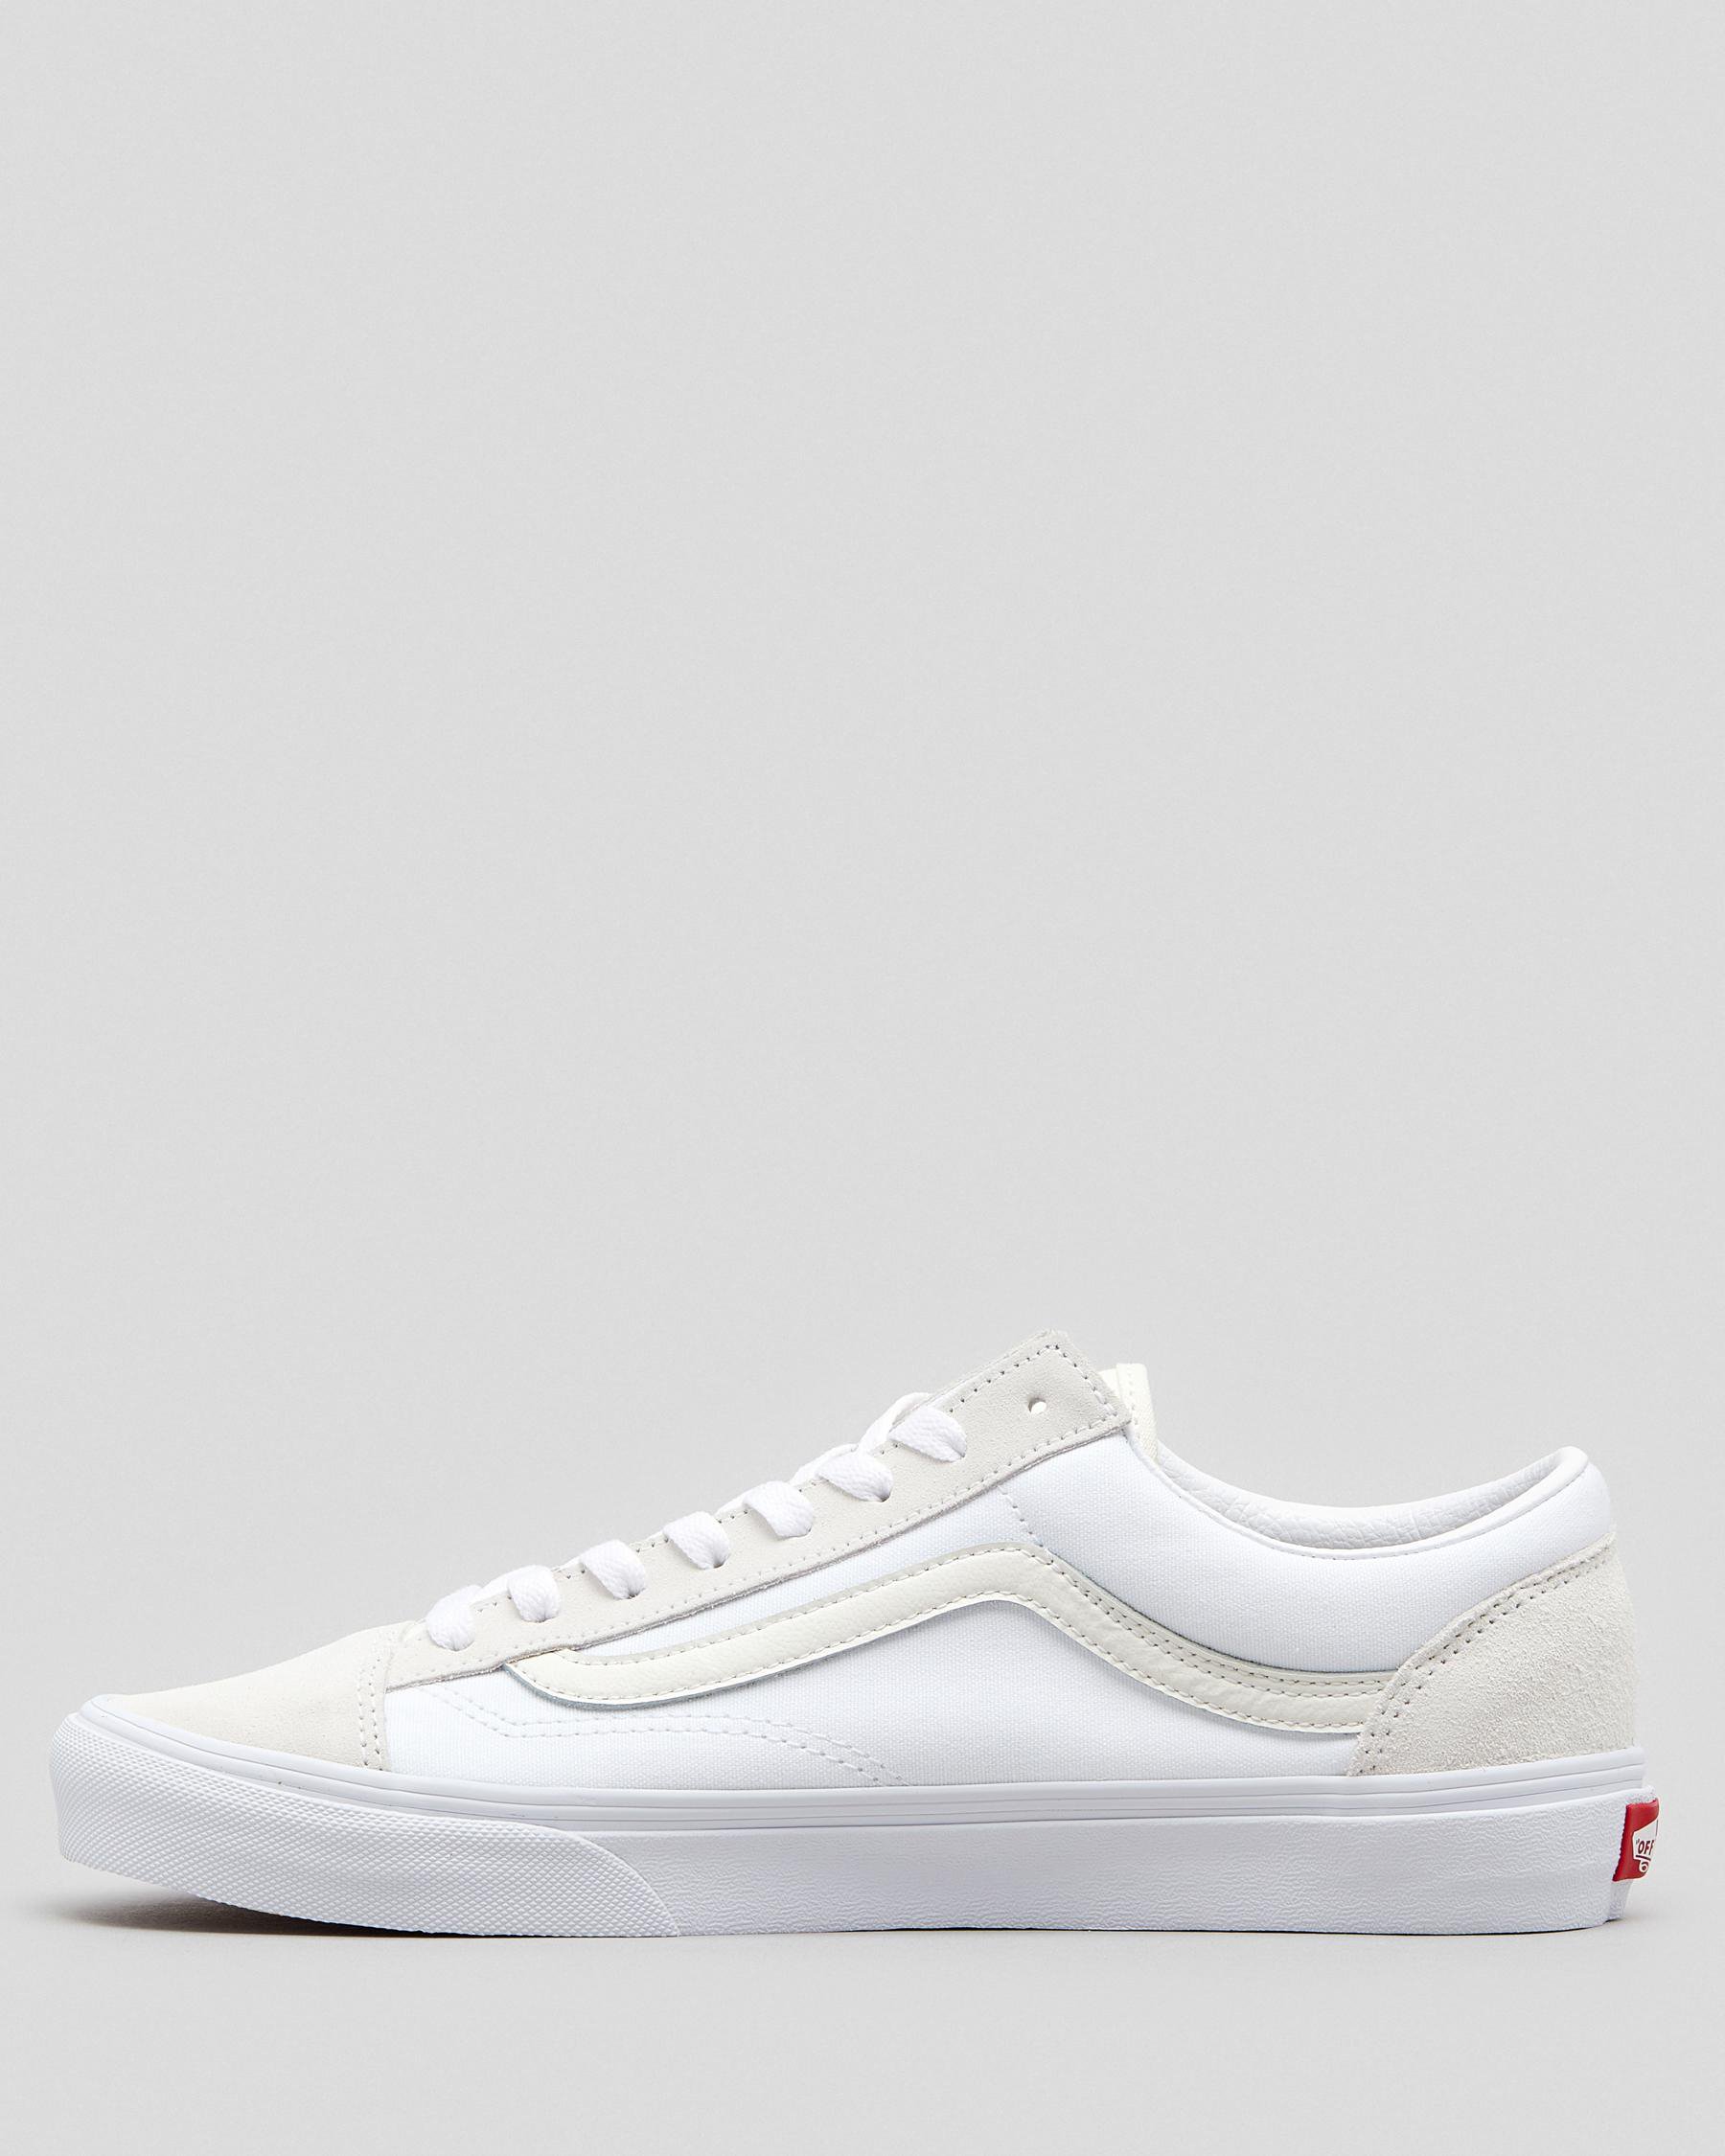 Vans Style 36 Shoes In Marshmallow/true White - Fast Shipping & Easy ...